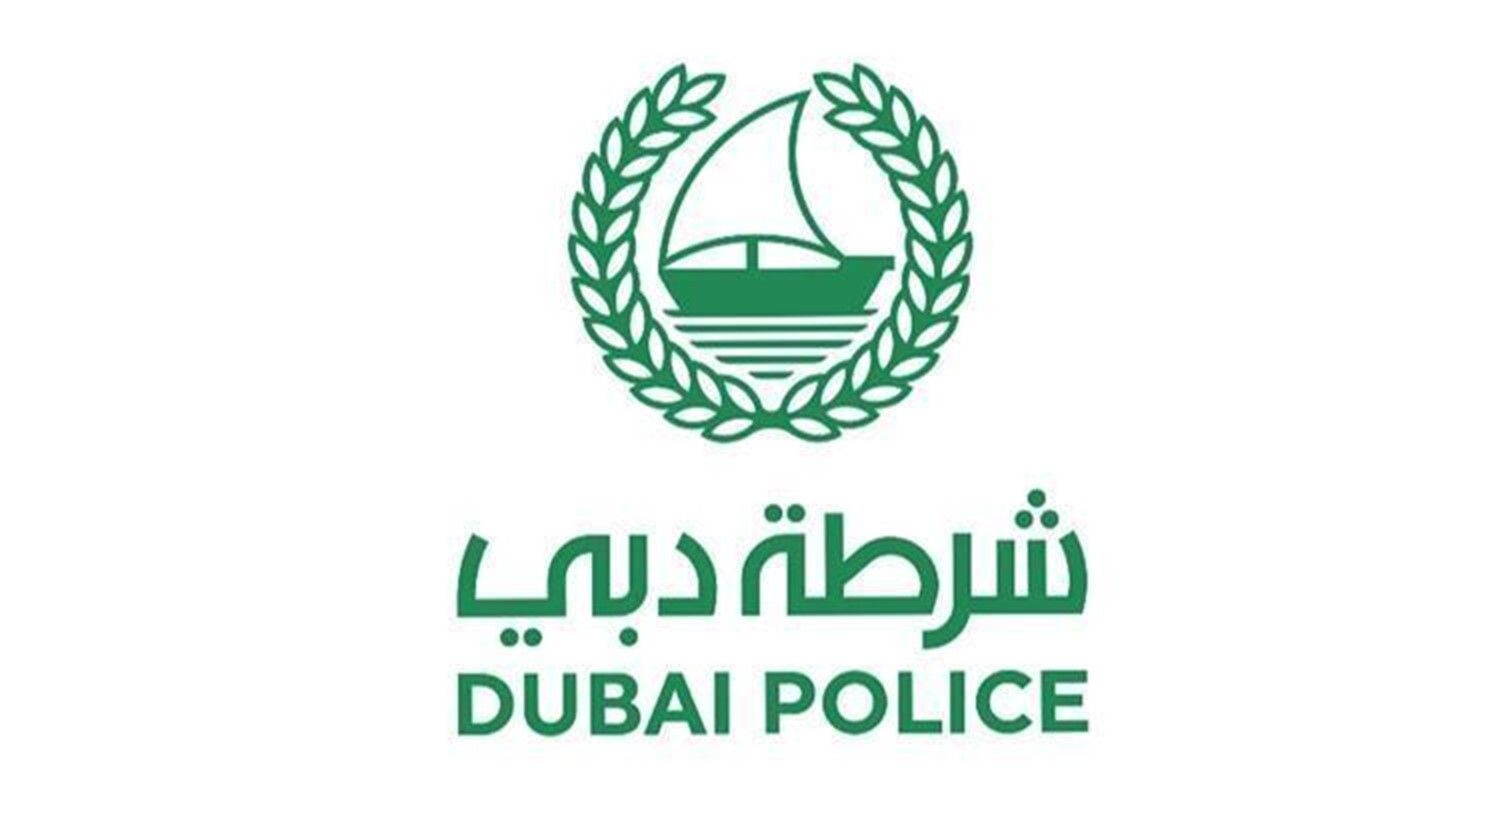 More Than Three People From Same Family Can Travel Together In A Car Dubai Police